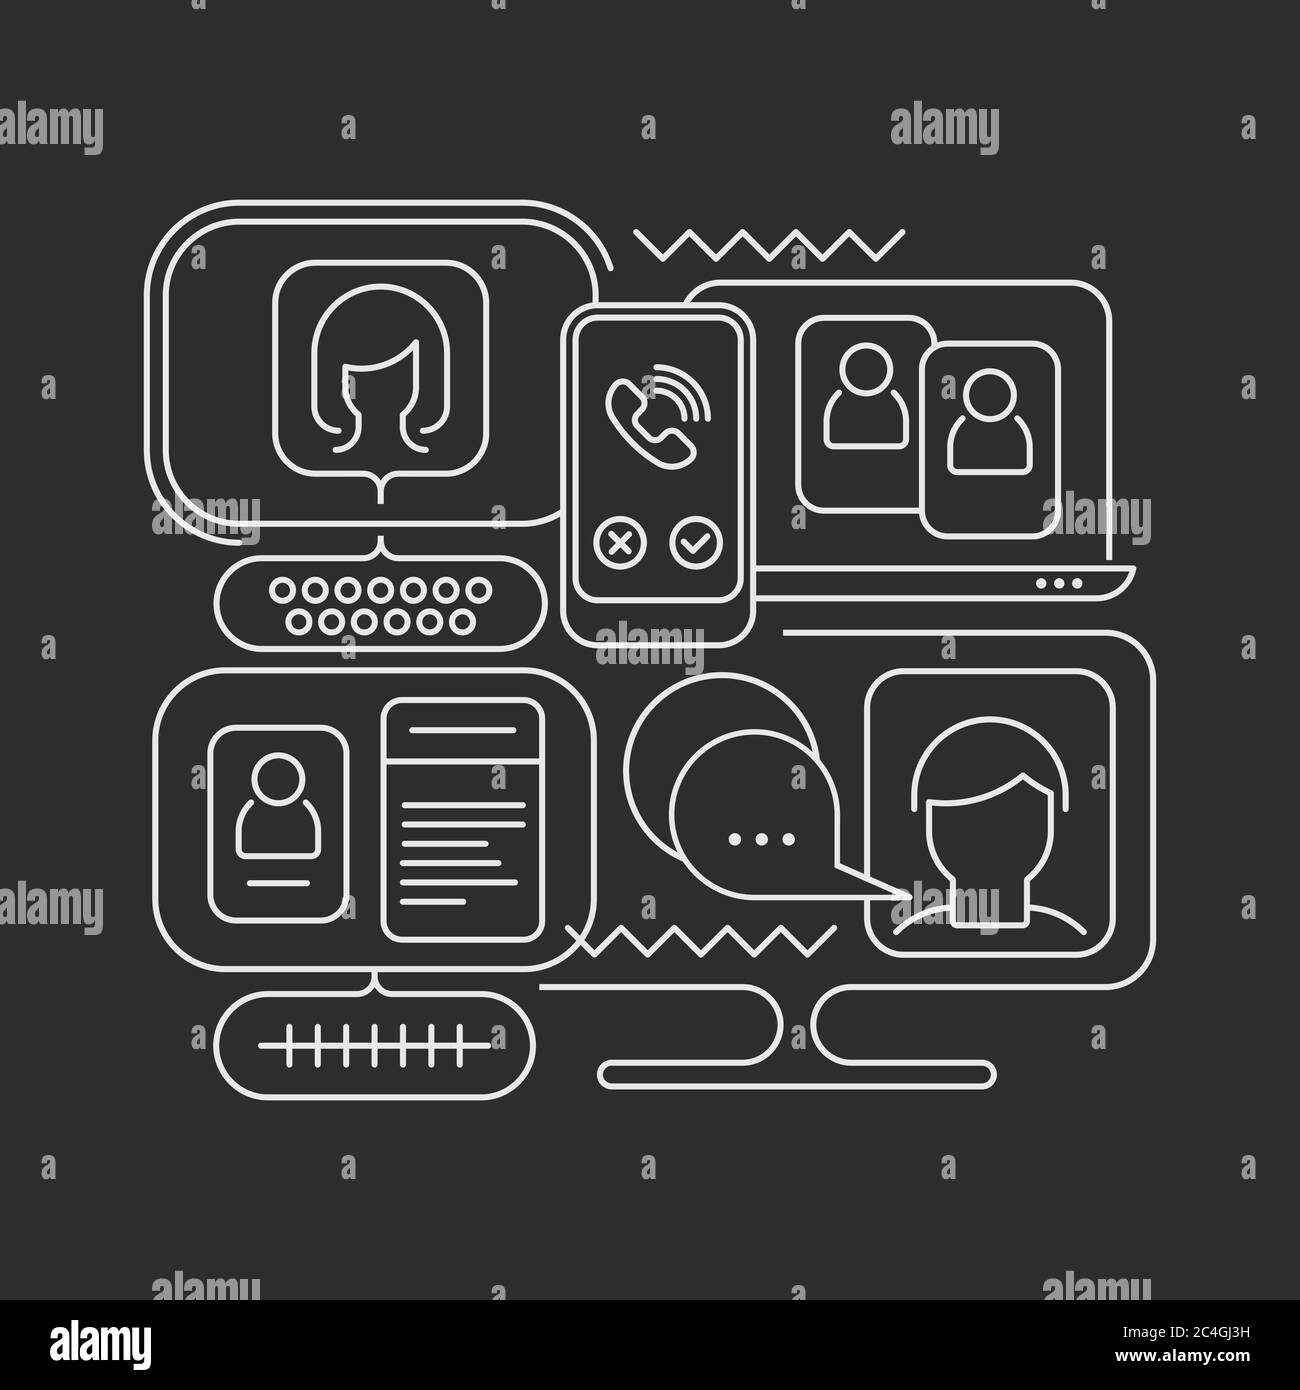 White line art isolated on a dark grey background Online Chatting vector illustration. Computer monitors and smartphone screens with chat messages, vi Stock Vector